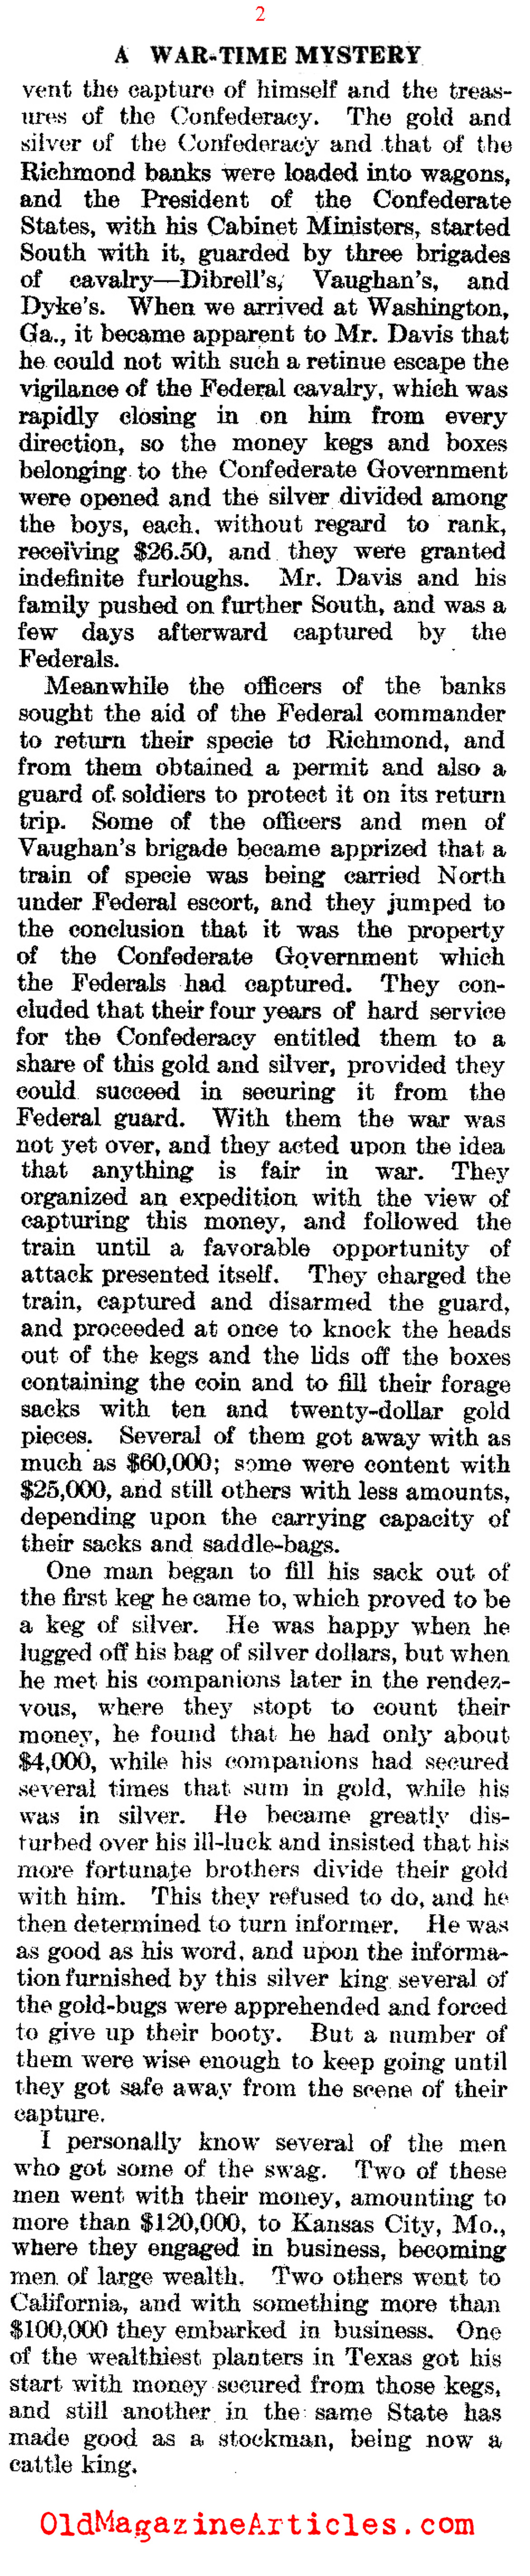 The Missing Confederate Gold (Literary Digest, 1912)